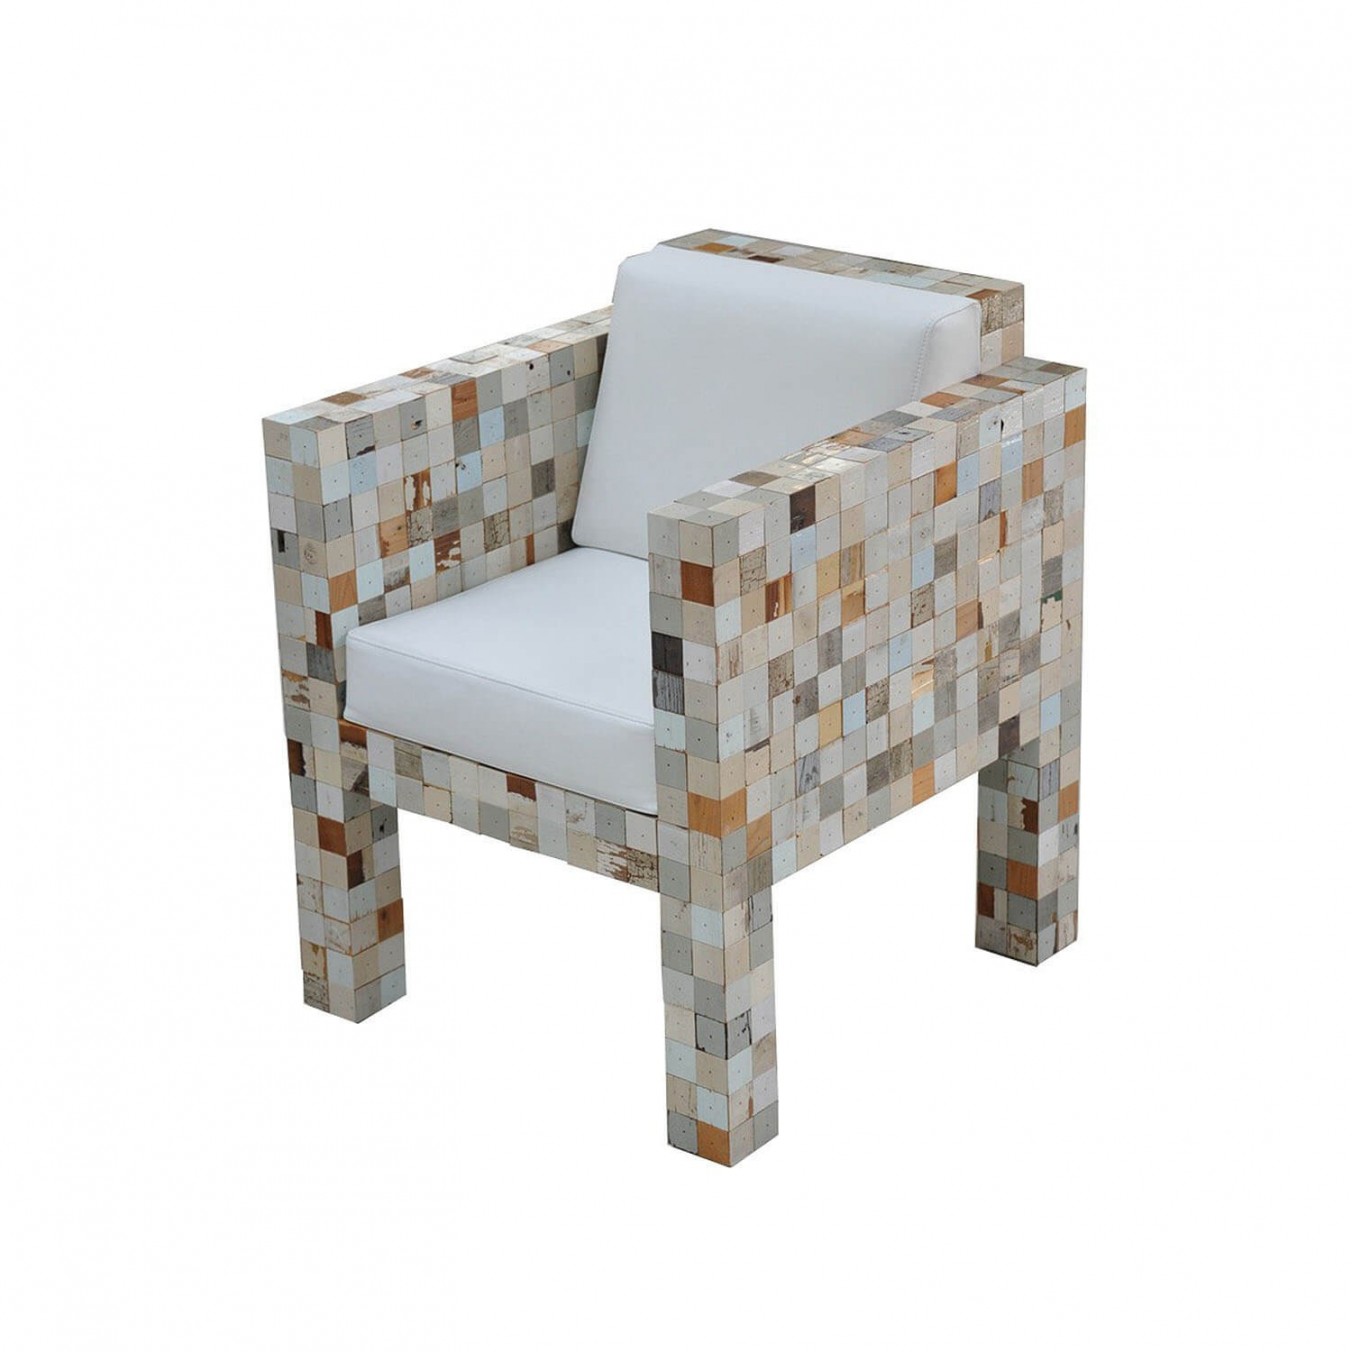 Waste waste fauteuil